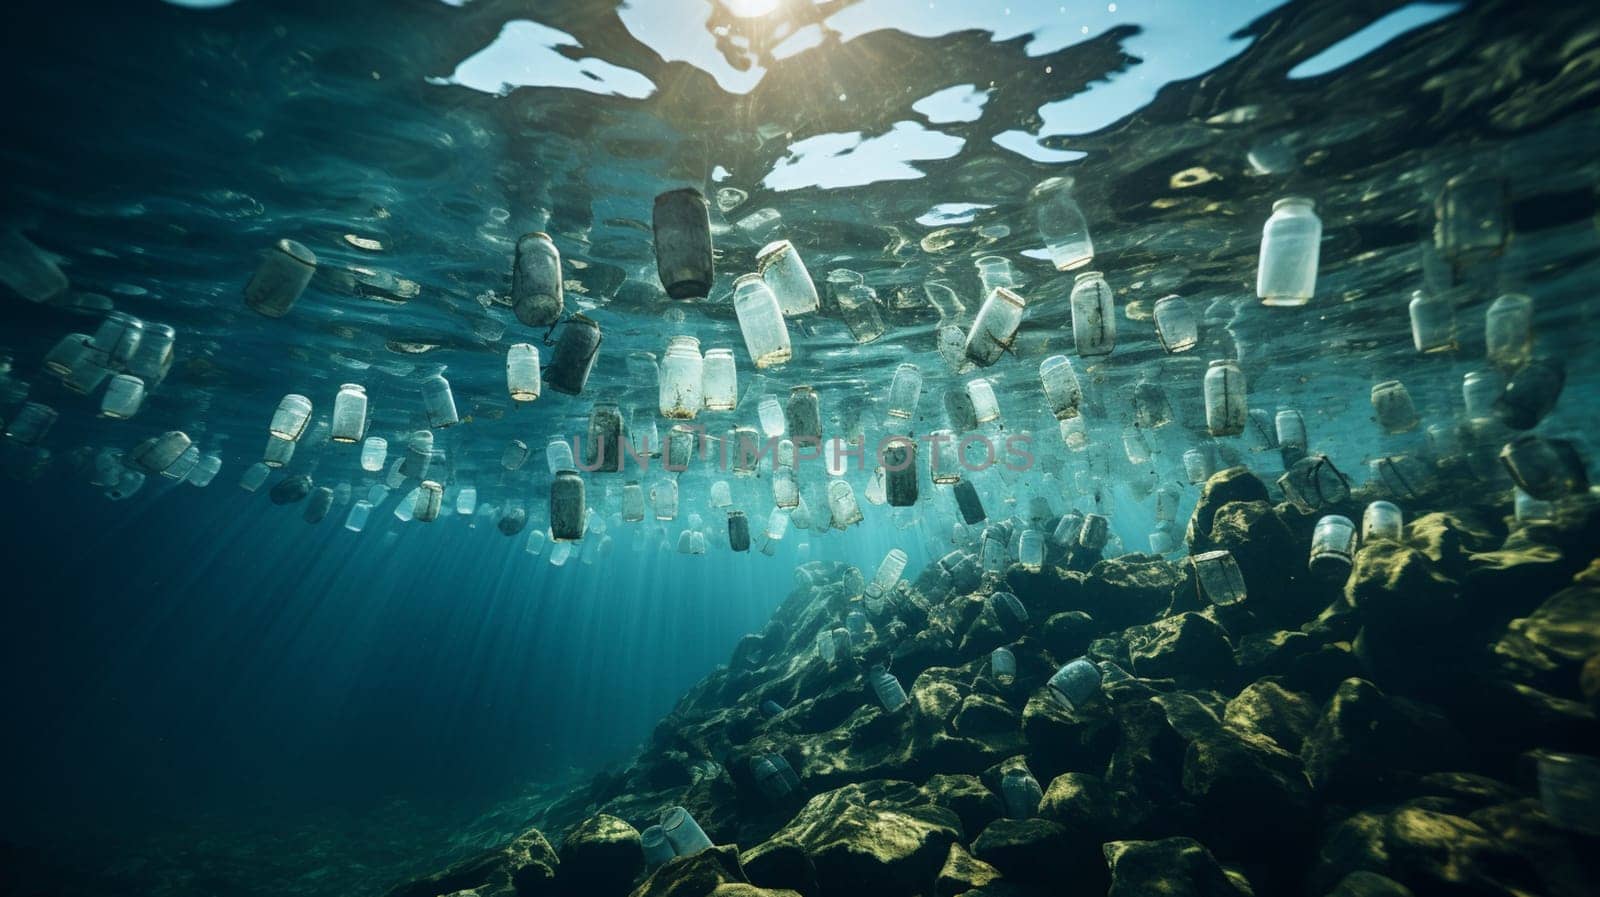 assorted trash sinking into the ocean contaminating the water. mixed media 3D illustration, rendering. High quality photo